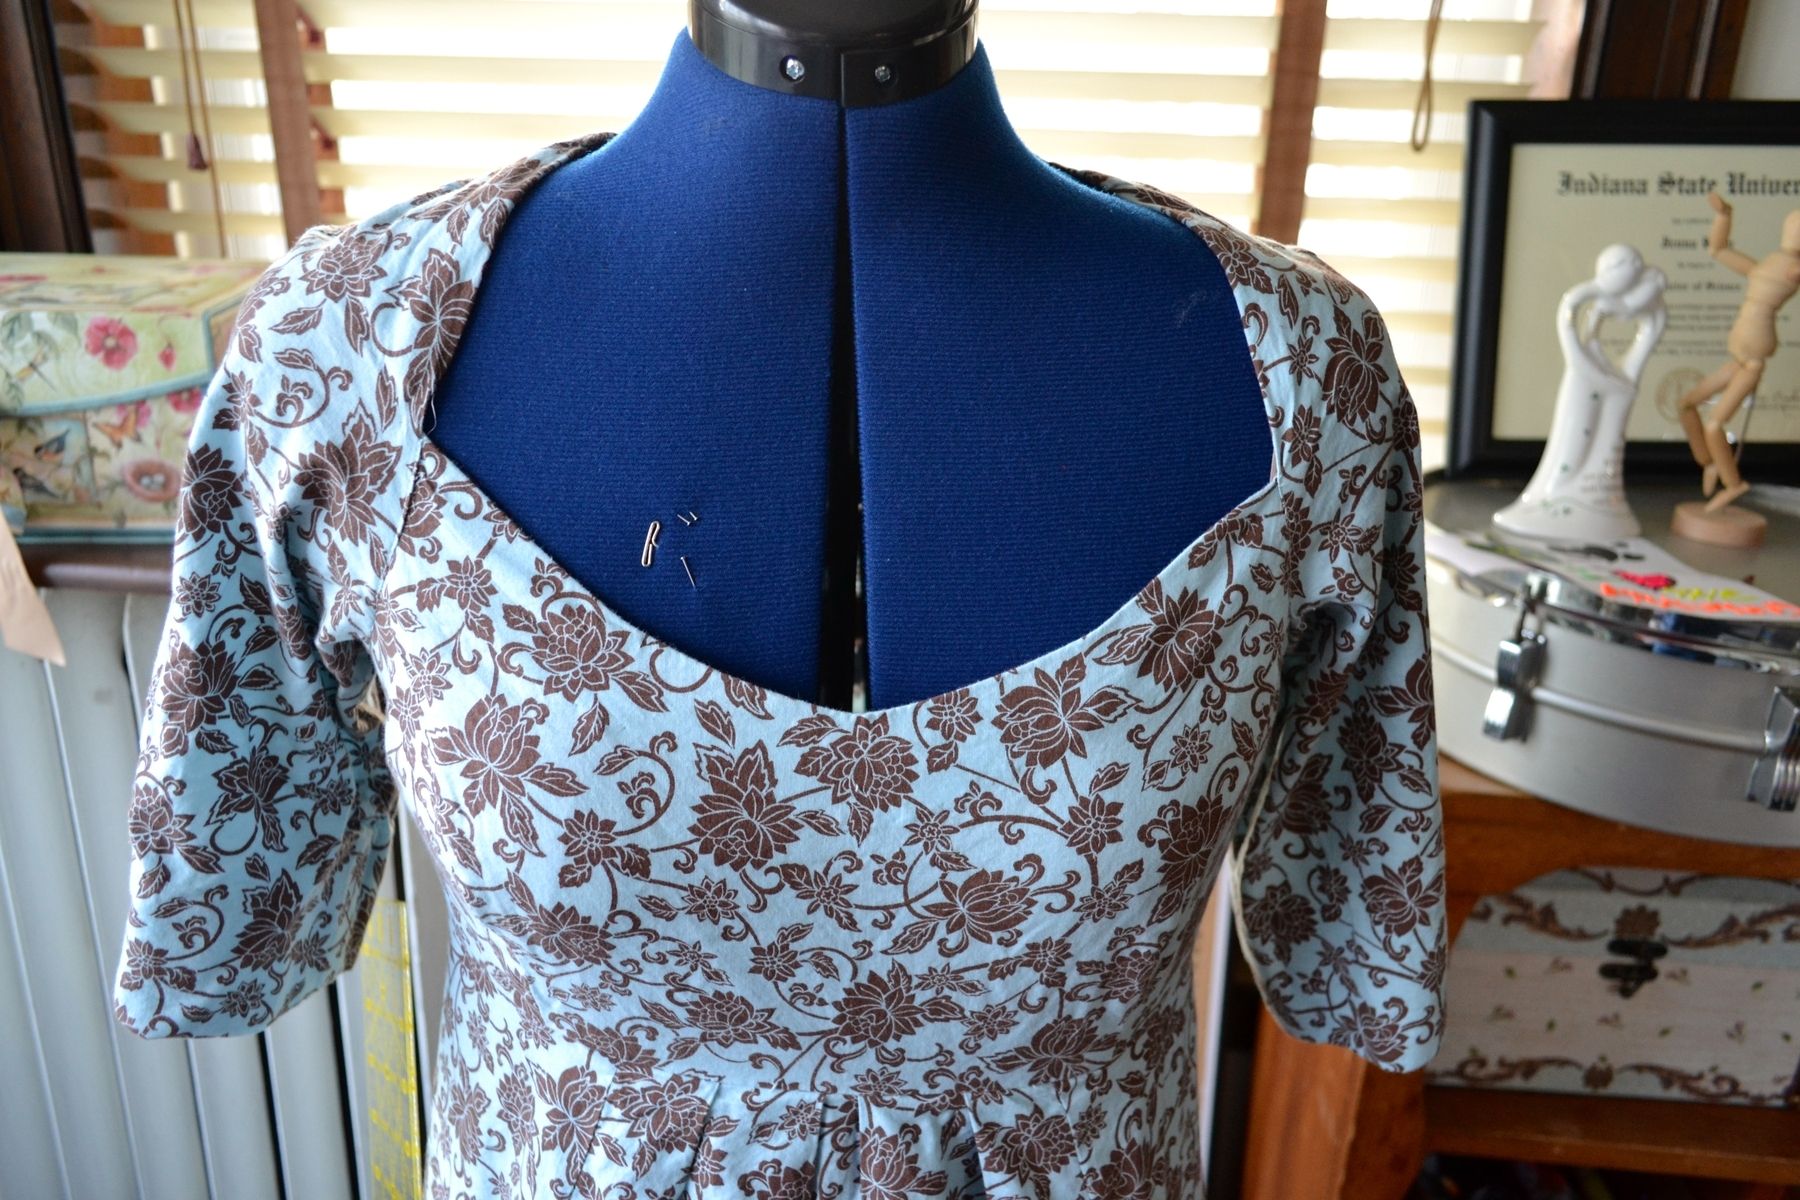 Custom Made A Dress With Pockets by Urban Custom: Commission Clothing ...